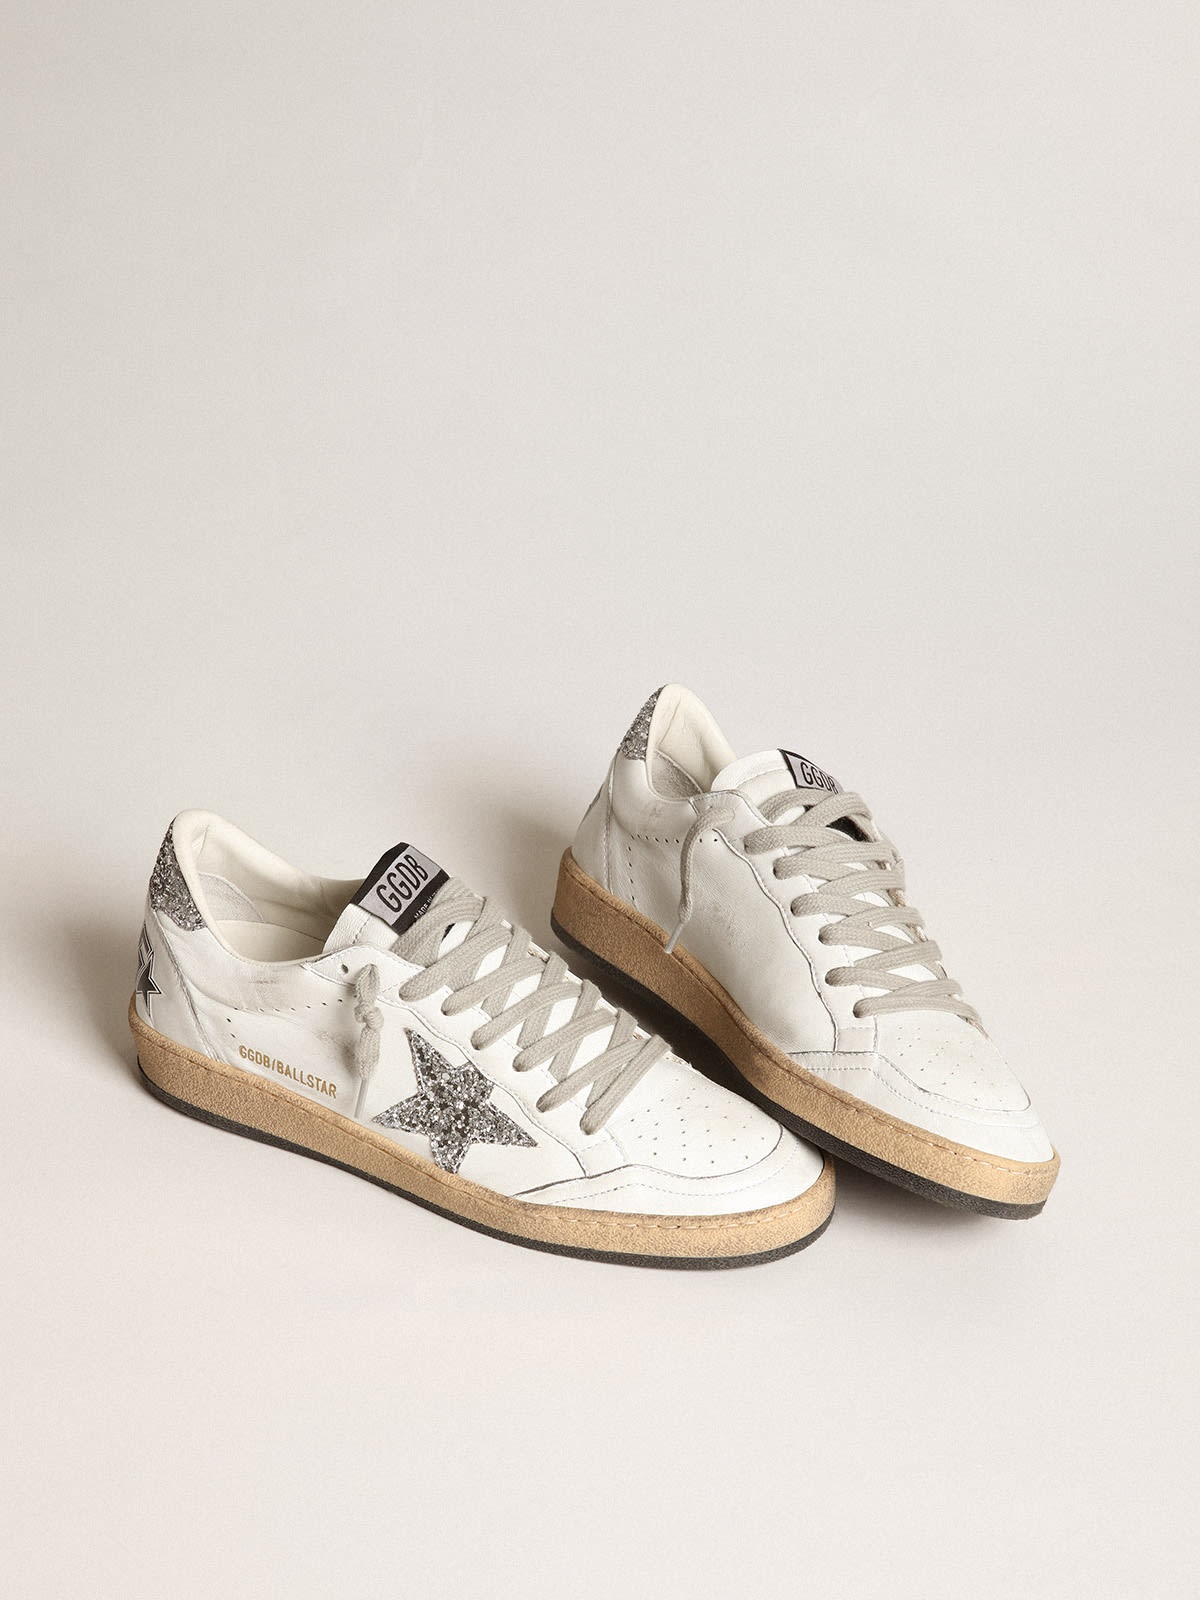 Ball Star sneakers in white nappa leather with silver glitter star and heel tab - 2